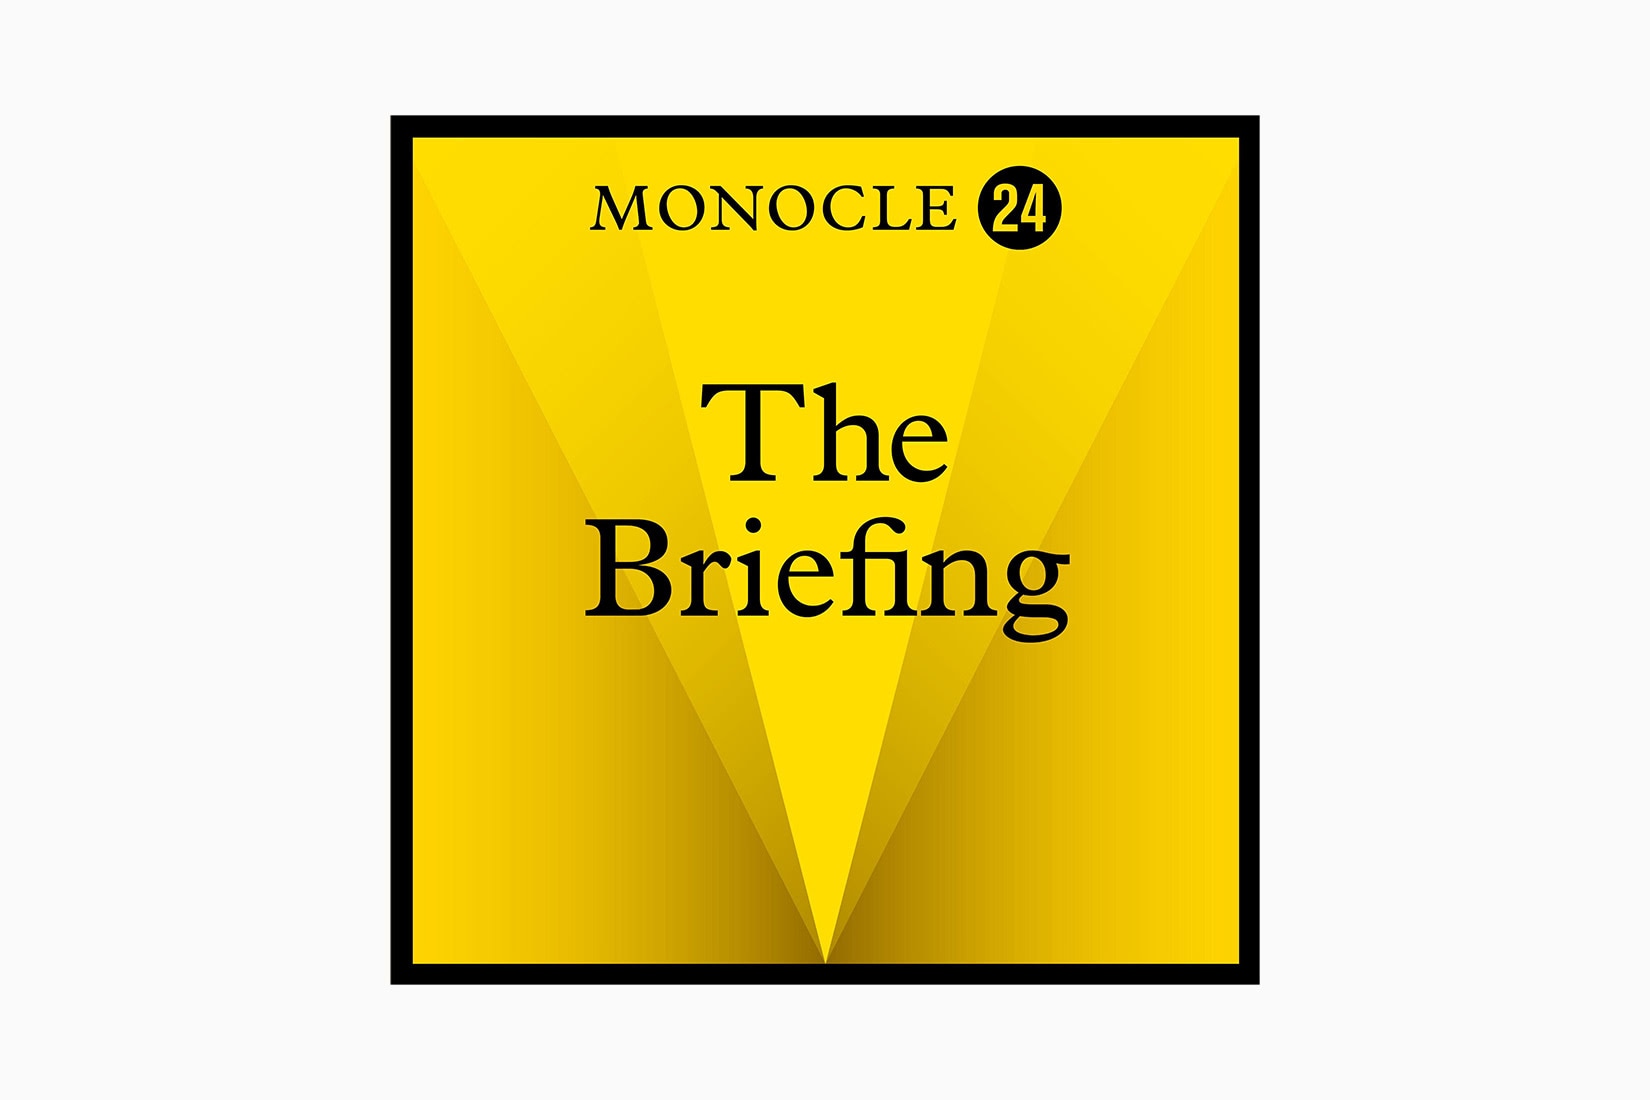 best podcasts the briefing monocle 24 luxe digital